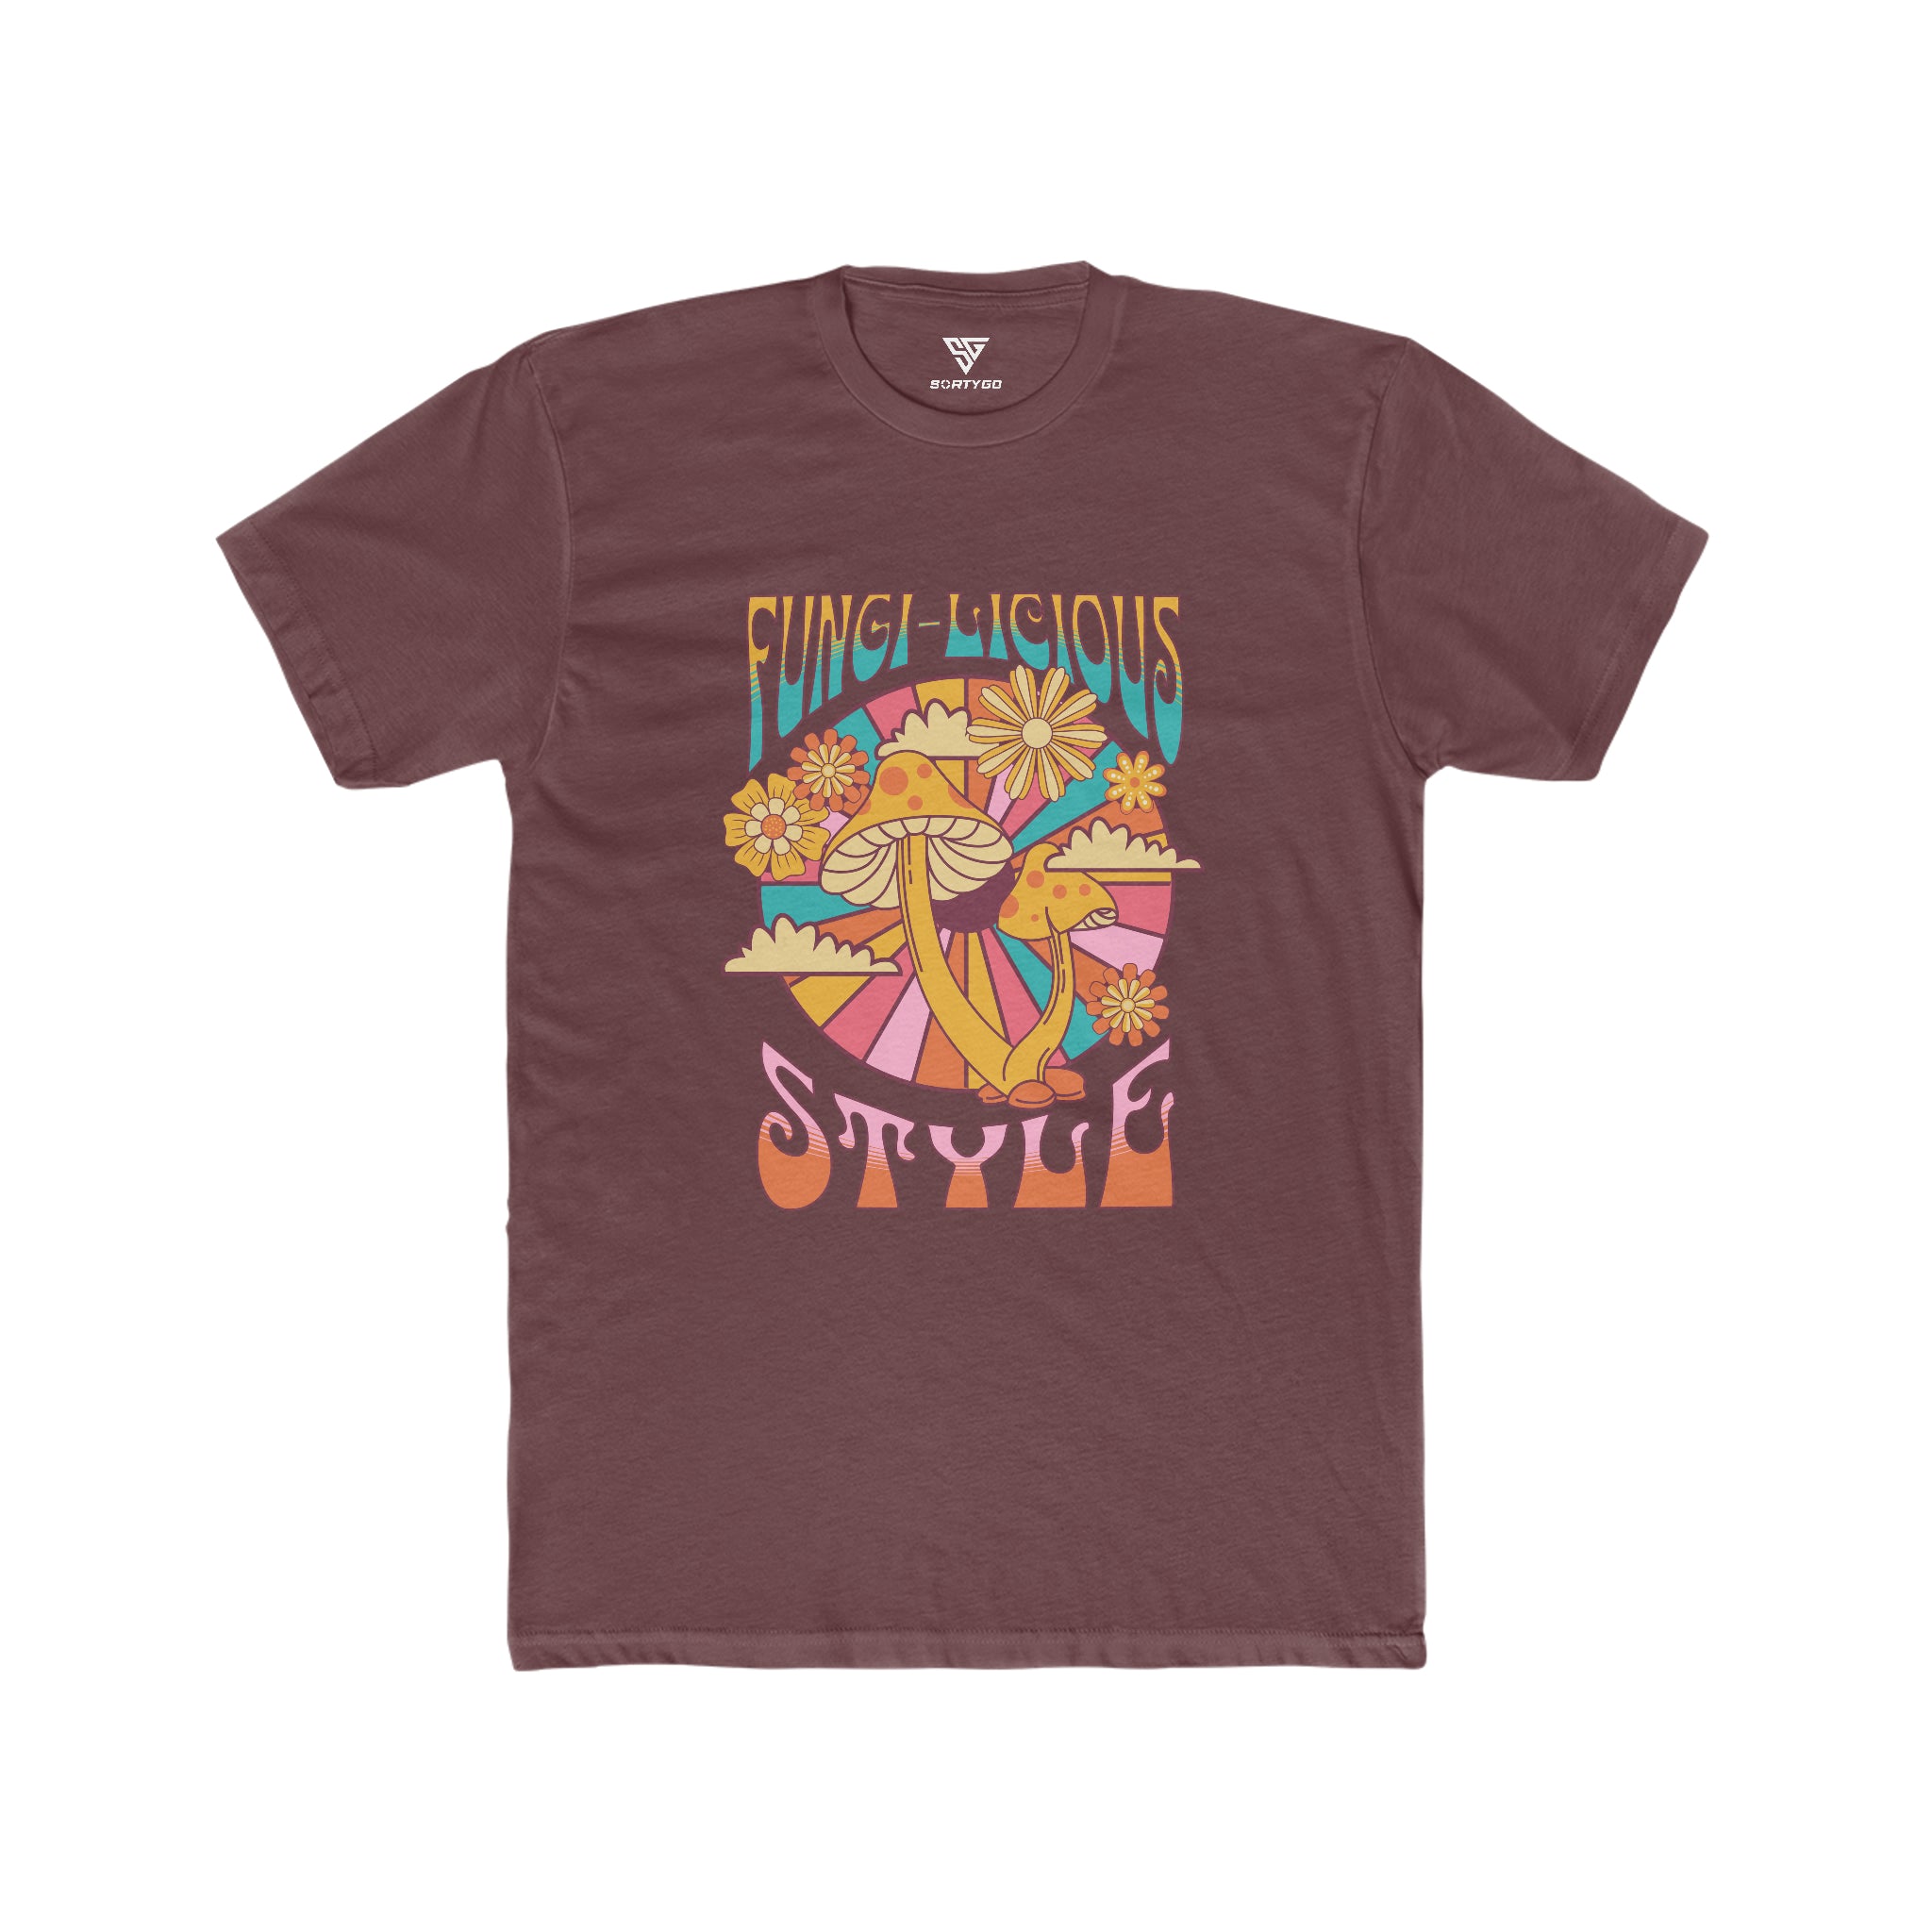 SORTYGO - Fungi-licious Style Men Fitted T-Shirt in Solid Maroon